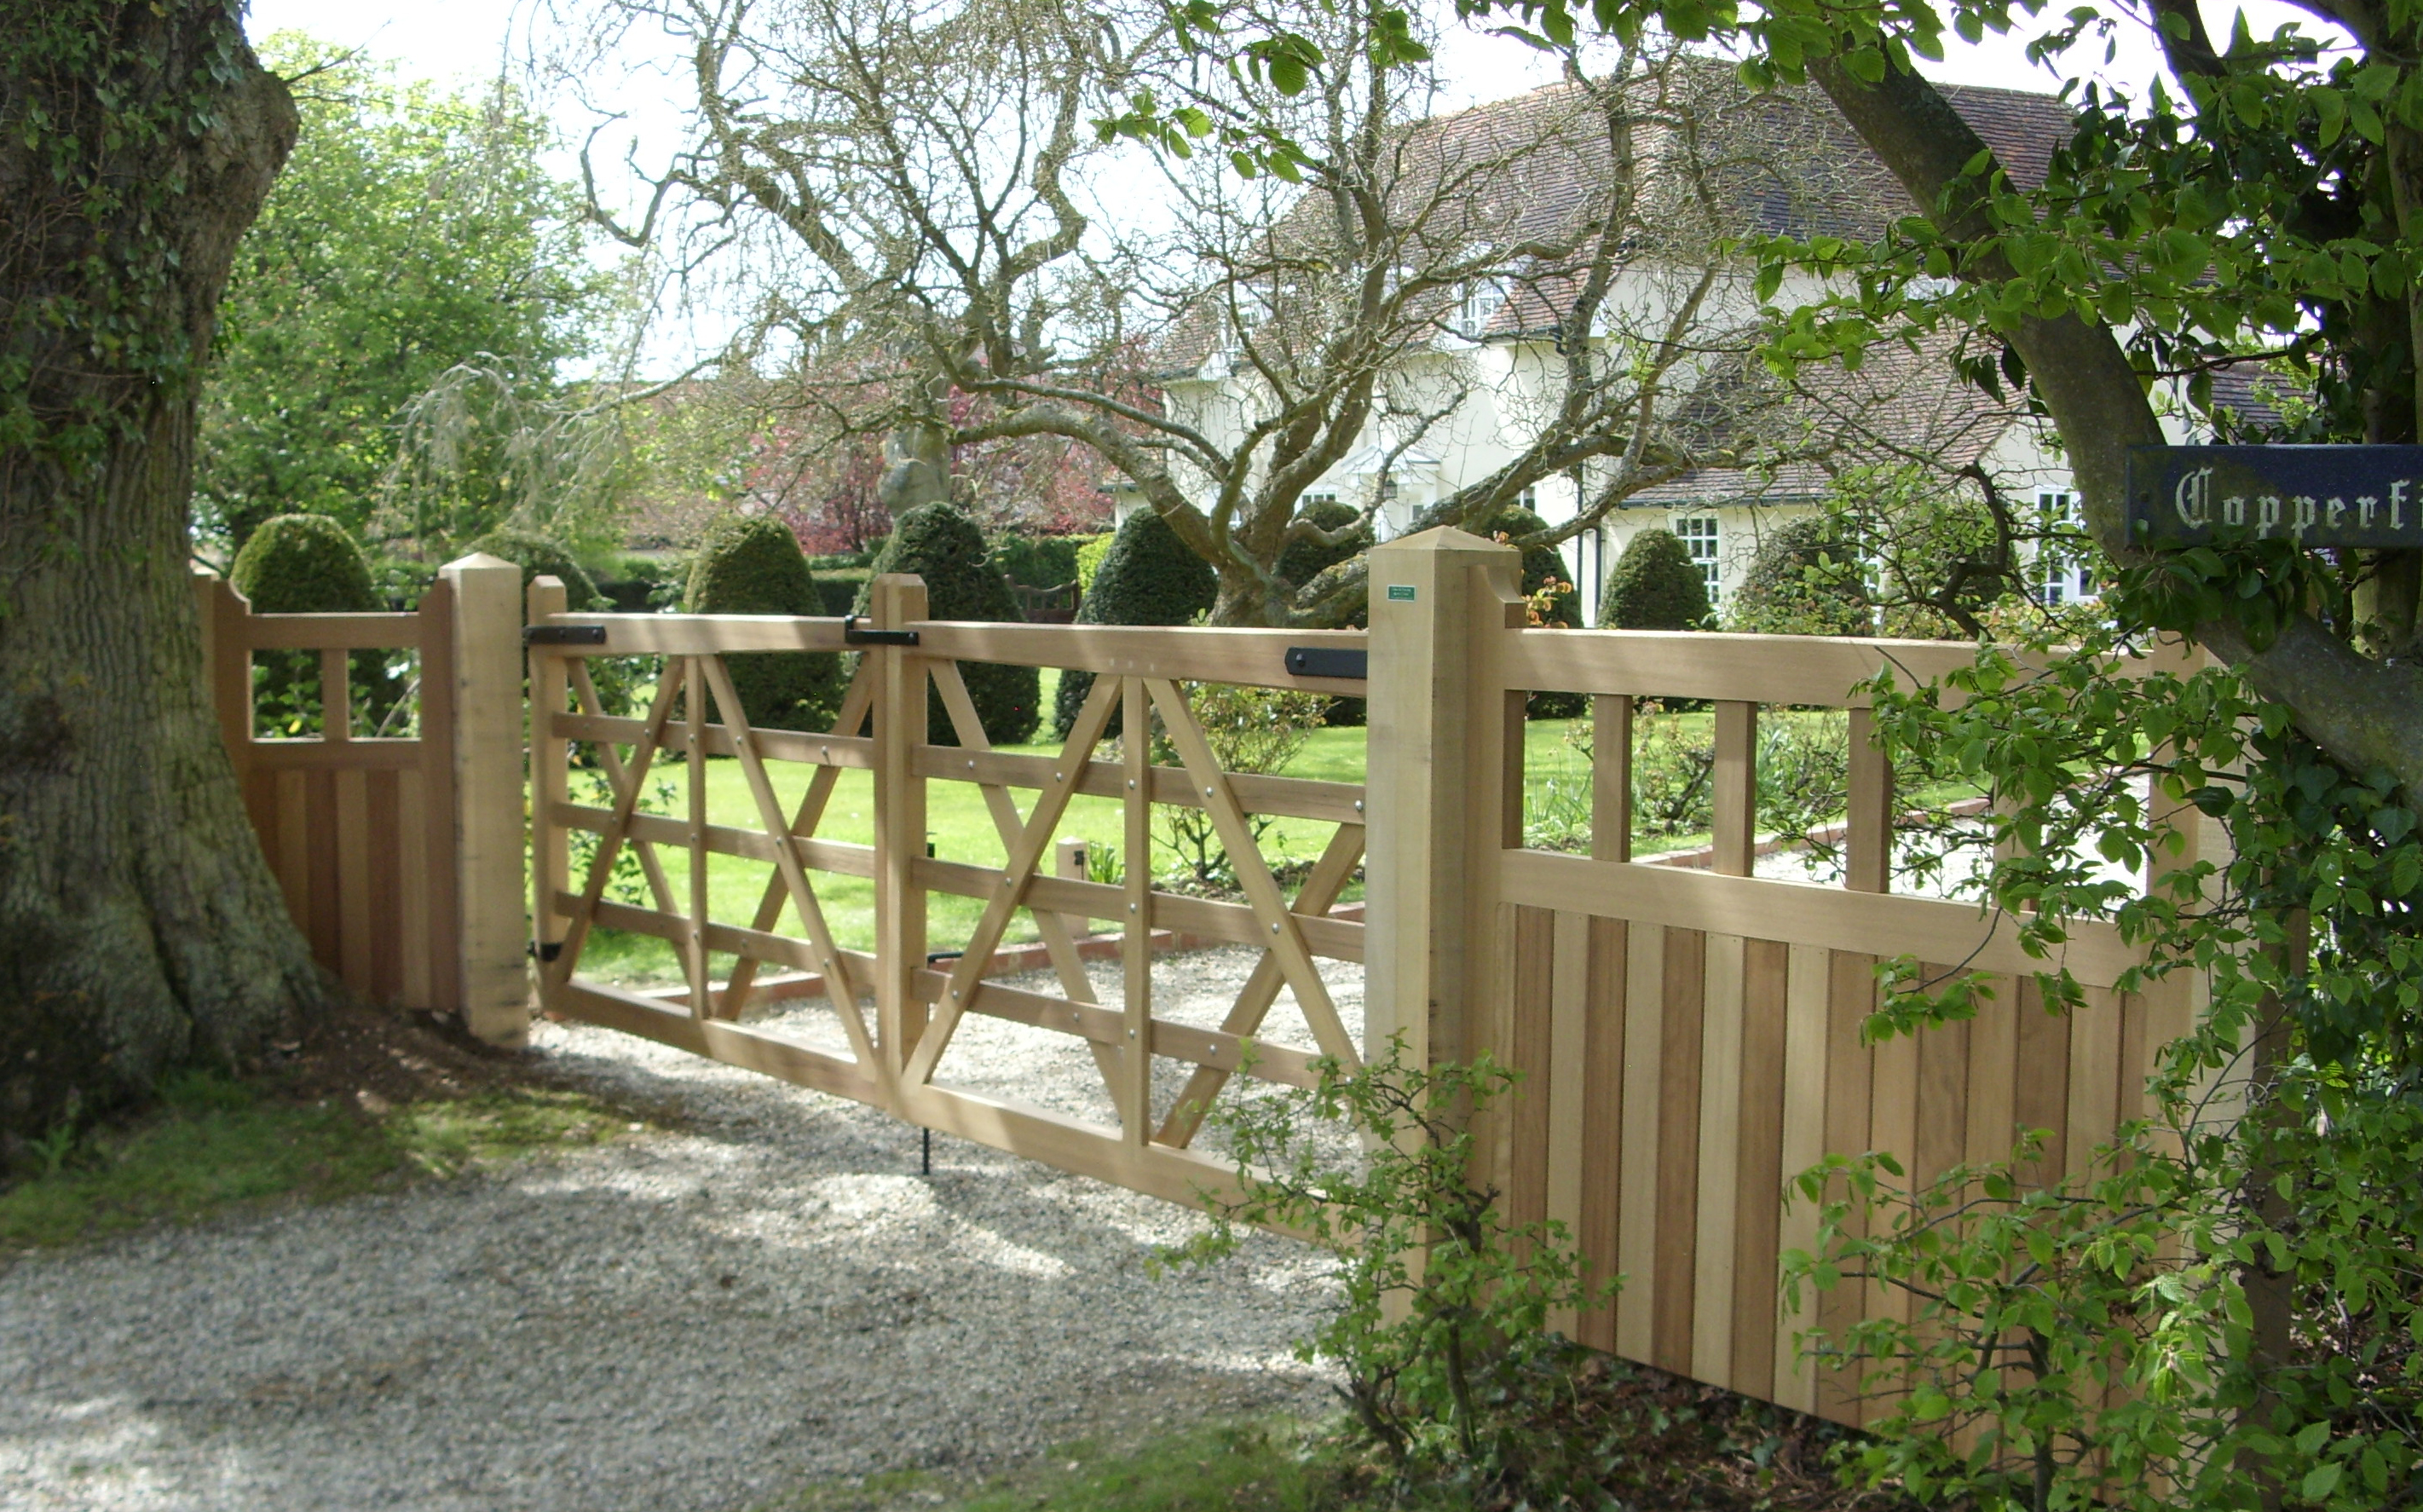 5 bar style gate with co-ordinating side panels